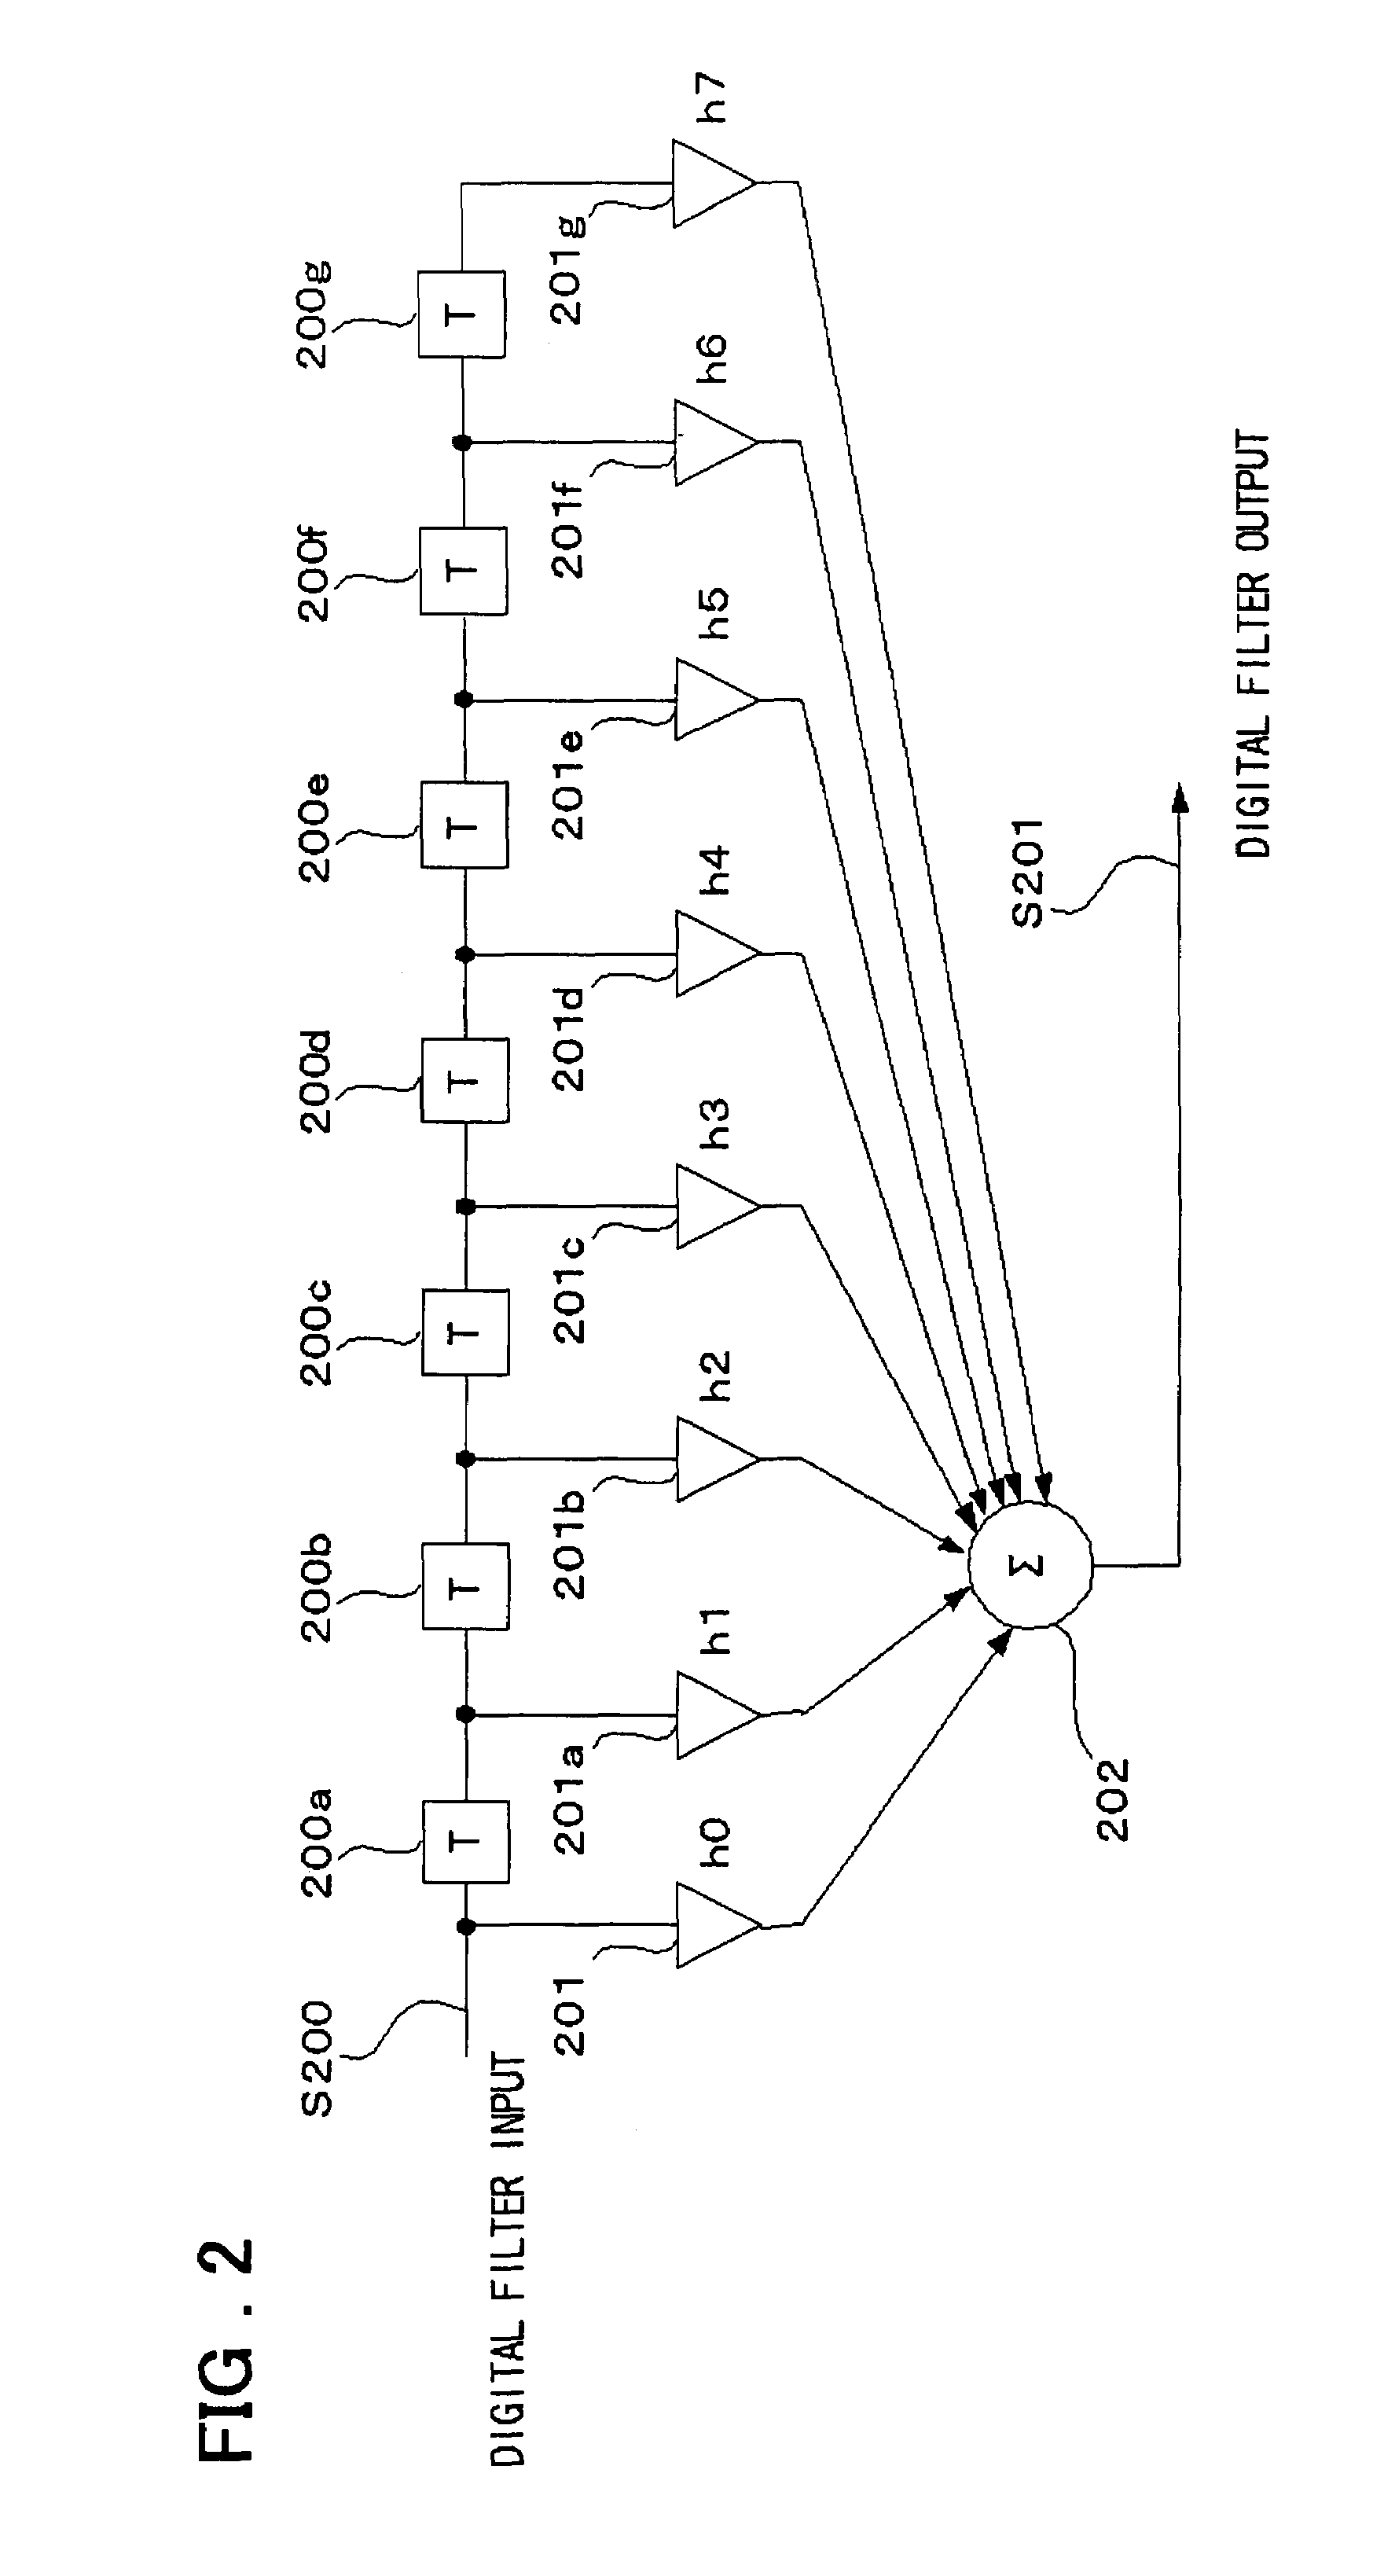 Time-interleaved A/D converter device